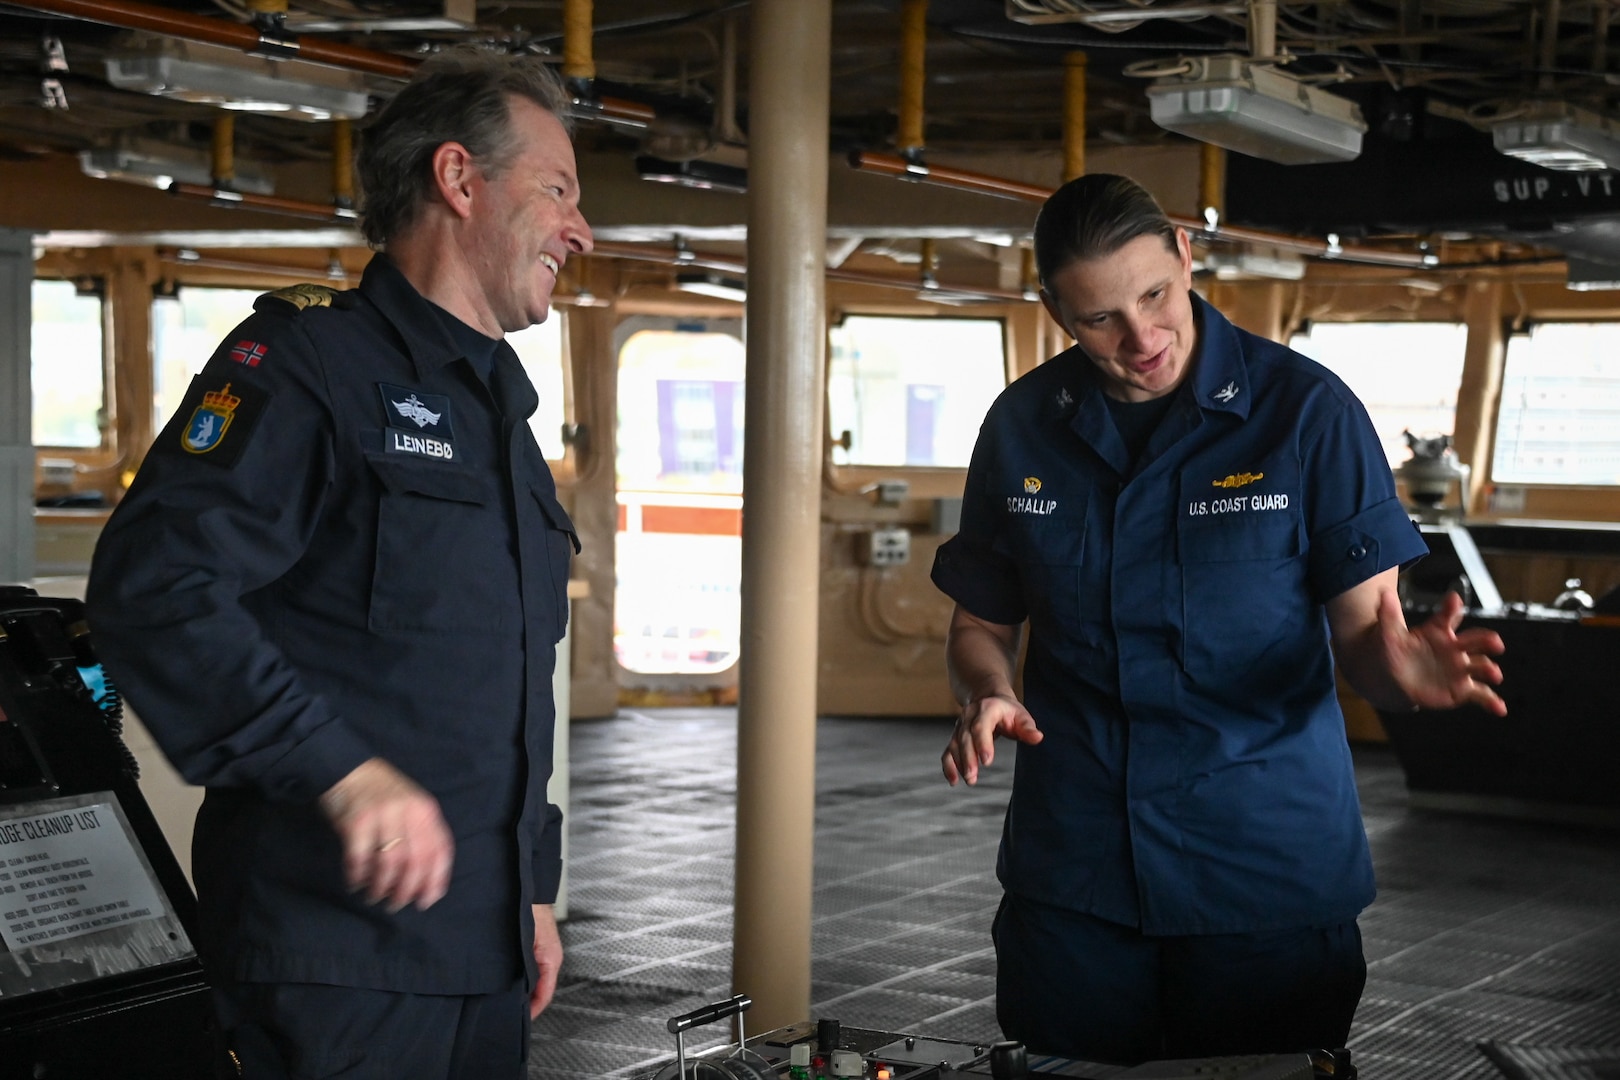 U.S. Coast Guard Capt. Michele Schallip, commanding officer of the U.S. Coast Guard Cutter Healy (WAGB 20), discusses the Healy’s bridge systems to Commander Geir-Martin Leinebø, commanding officer of the Norwegian Coast Guard Vessel Svalbard, after the Healy moored in Tromsø, Norway, Oct. 1, 2023. The U.S. and Norwegian Coast Guards conducted joint exercises in the Barents Sea to develop cooperation, interoperability, and build partnerships among the two coast guards. (U.S. Coast Guard photo by Senior Chief Petty Officer Charly Tautfest)